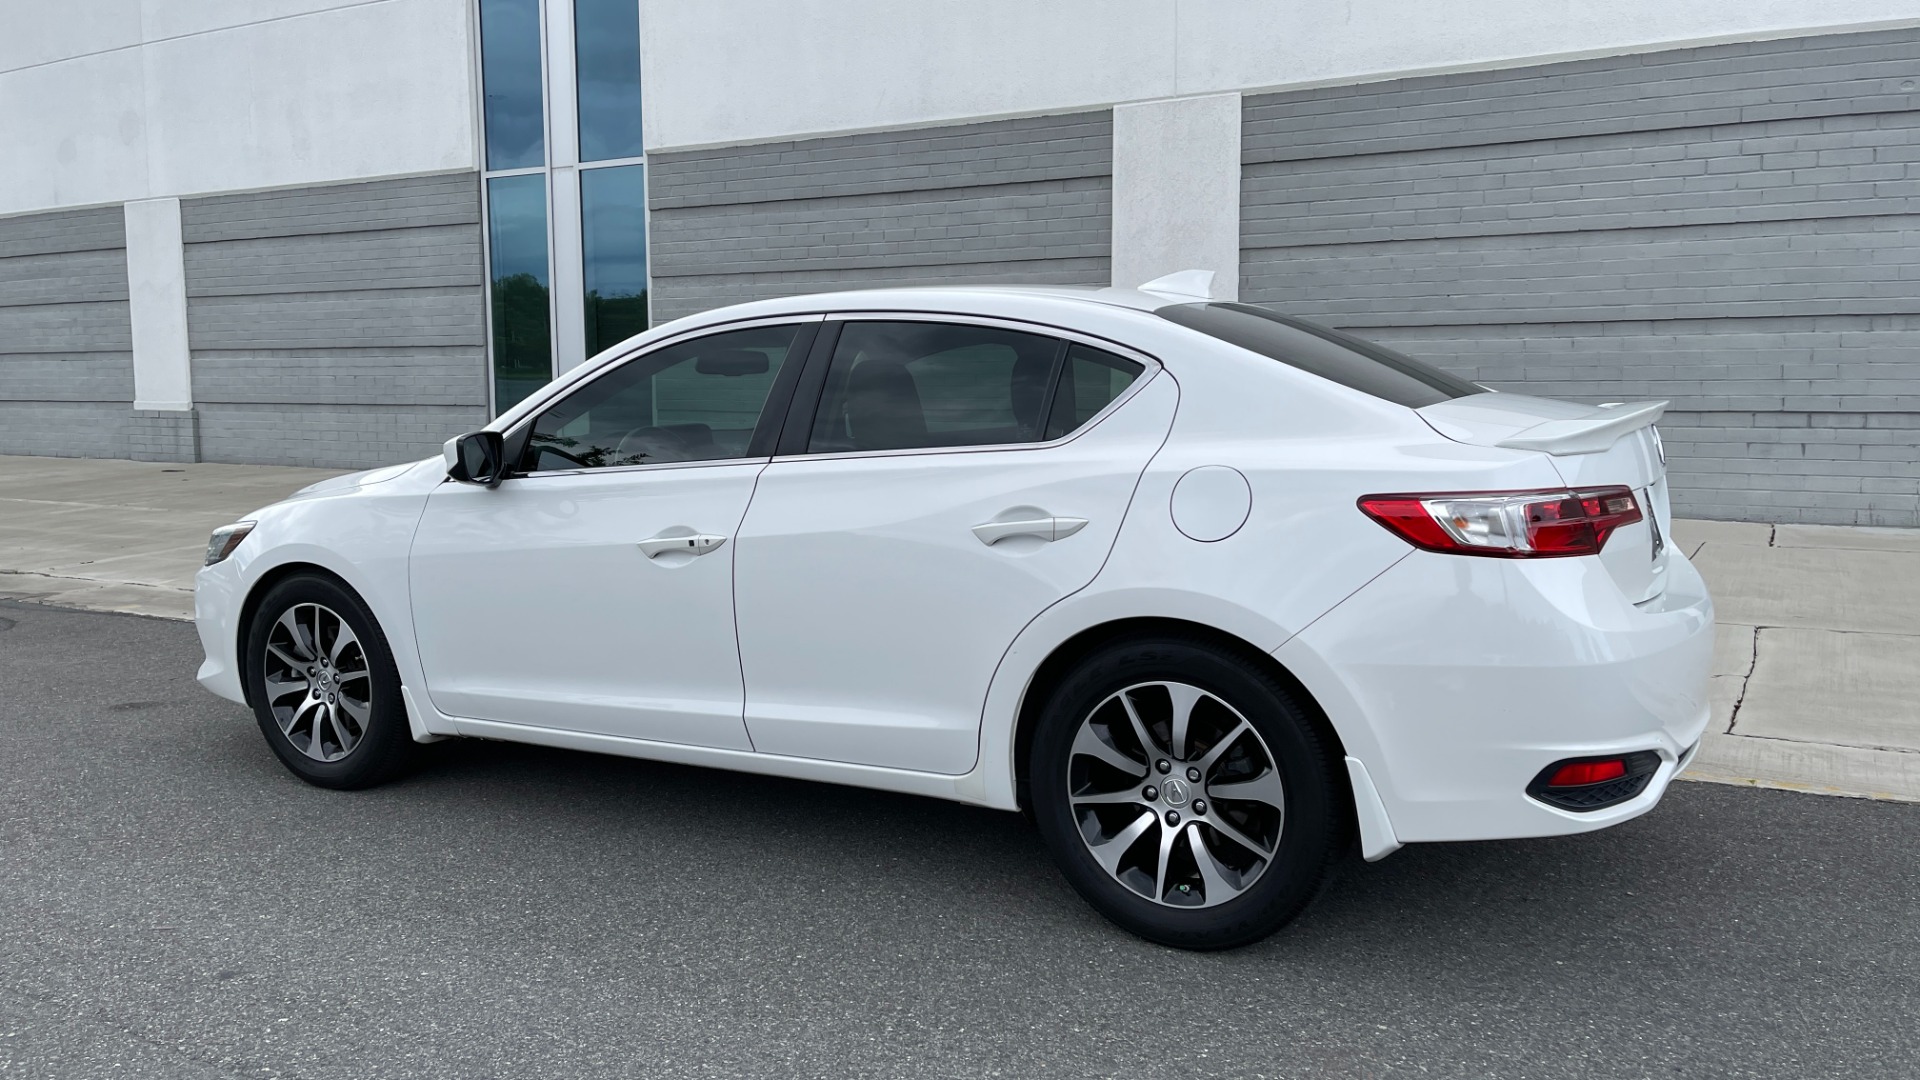 Used 2016 Acura ILX 4DR SEDAN / 2.4L I4 / FWD / STREAMING AUDIO / SUNROOF / REARVIEW for sale Sold at Formula Imports in Charlotte NC 28227 5